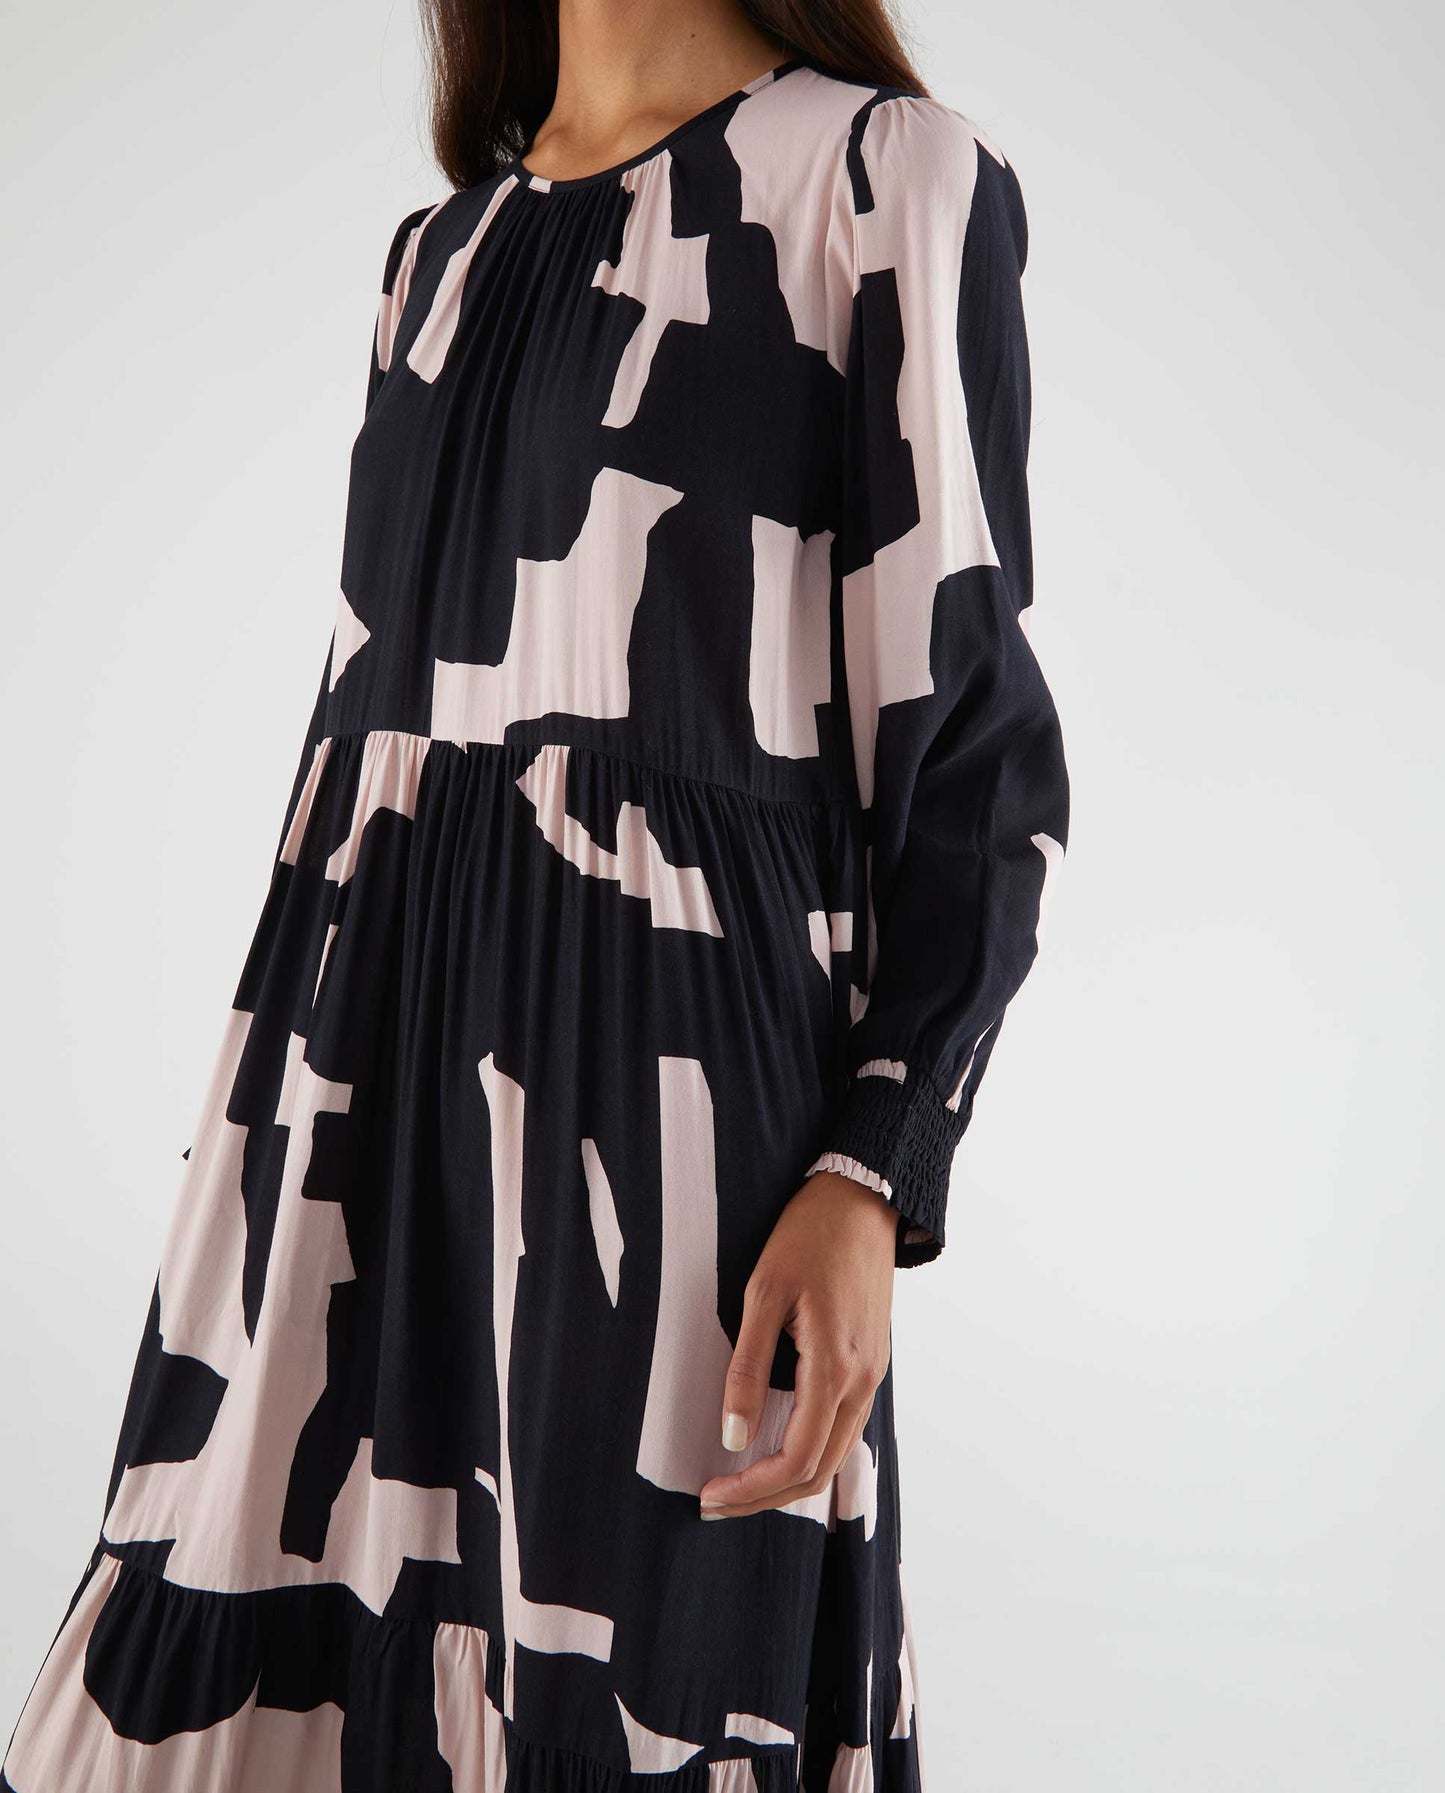 Compañia Fantastica - Navy and Pink Abstract Print Dress